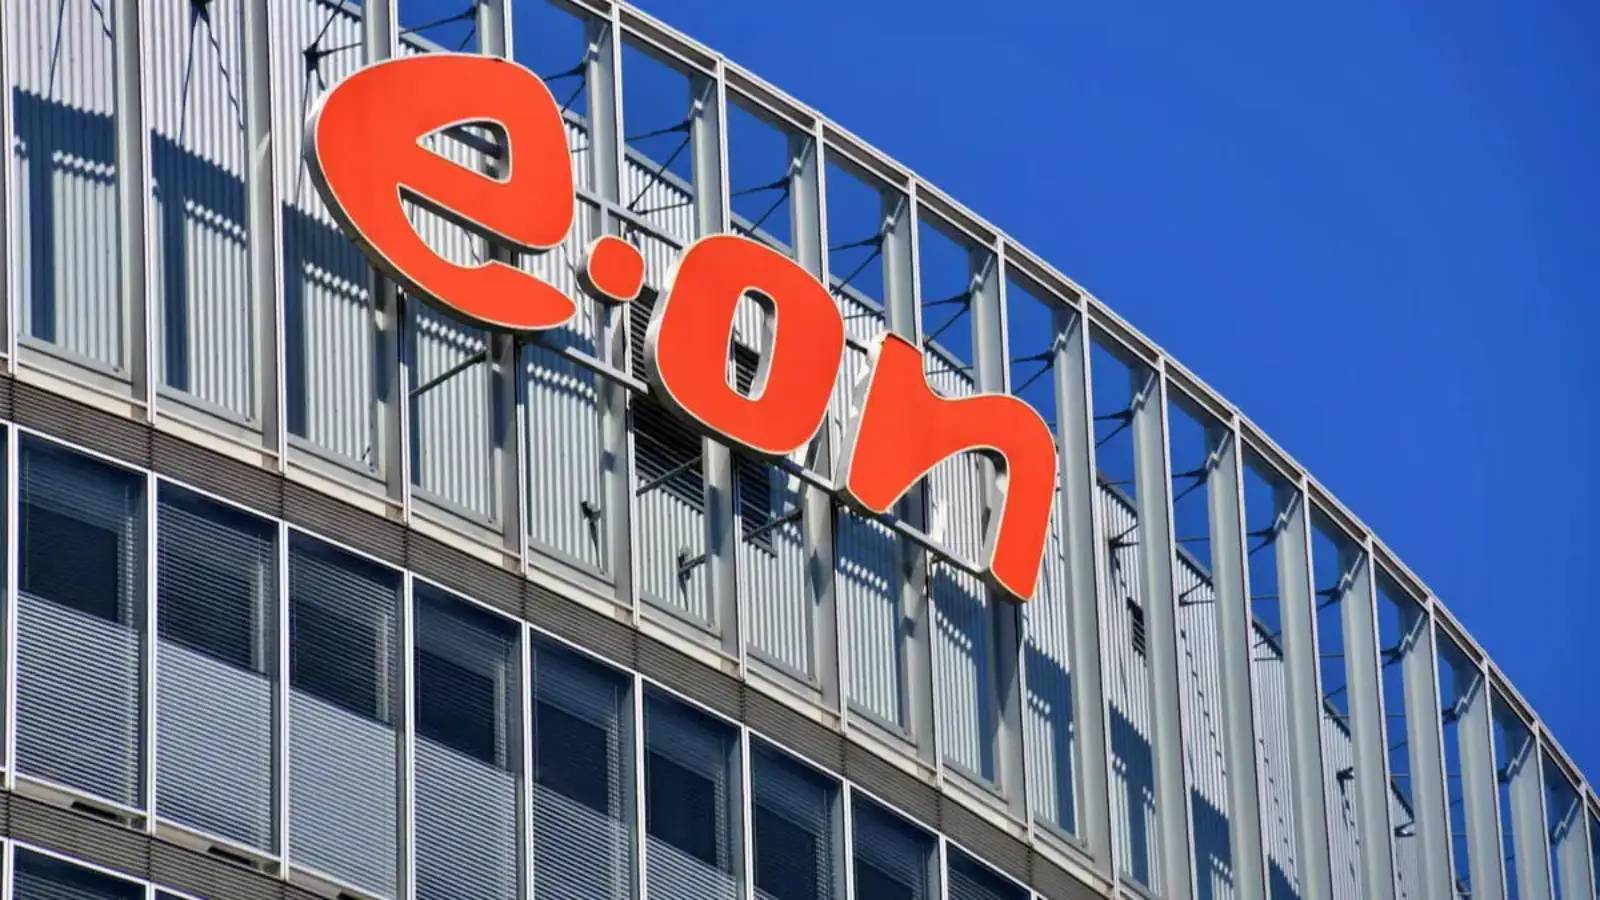 EON IMPORTANT Measures Taken Energy Group Officially Announced